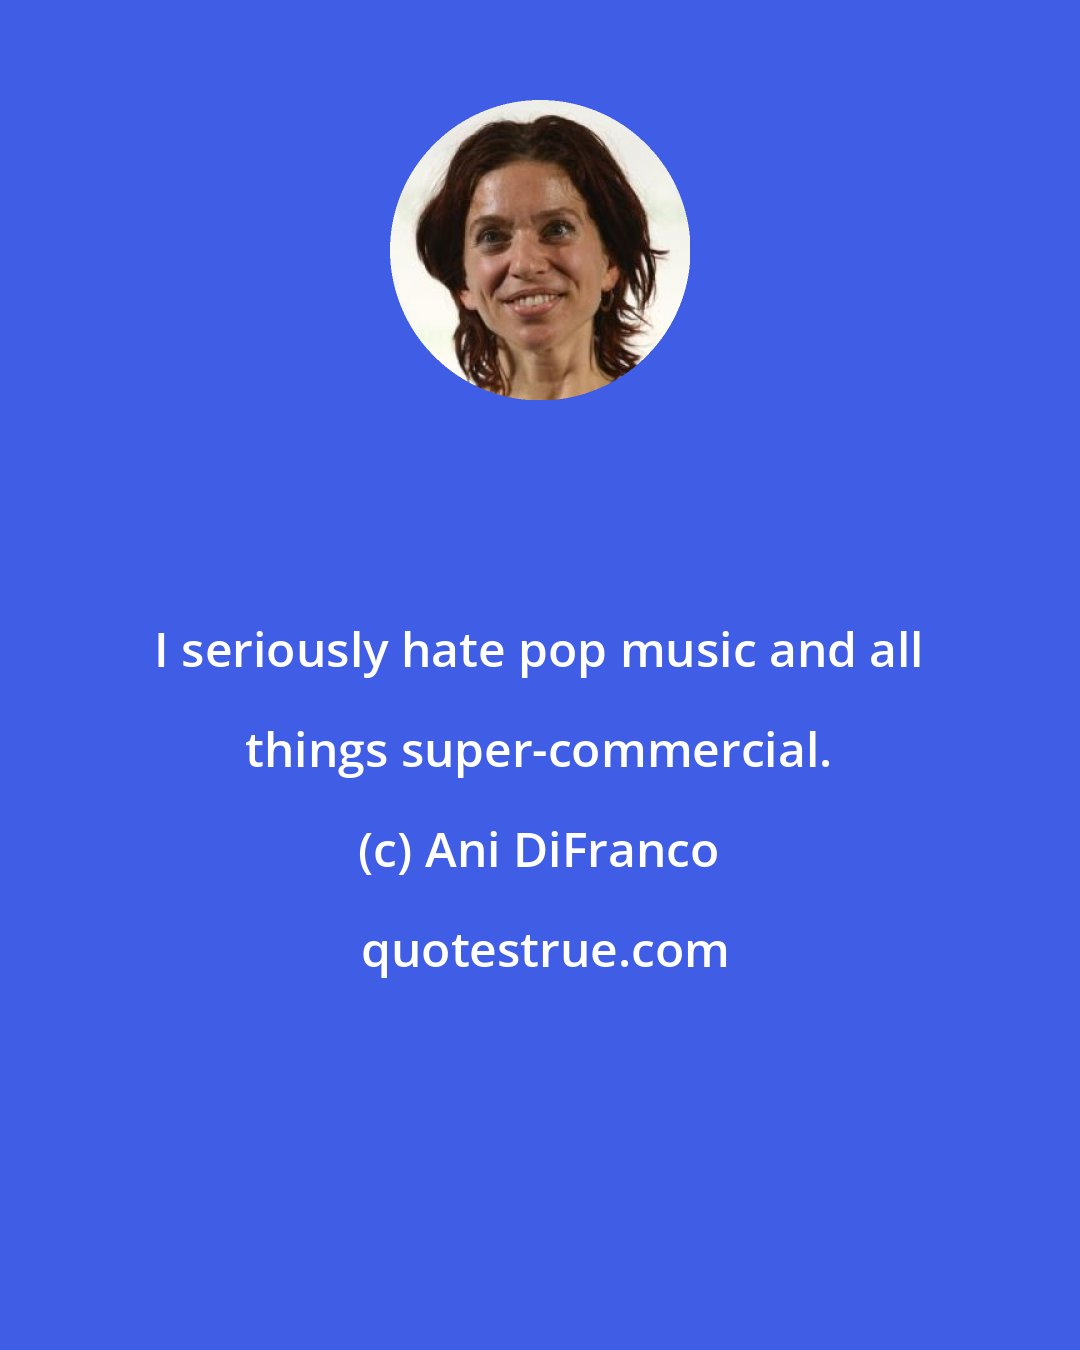 Ani DiFranco: I seriously hate pop music and all things super-commercial.